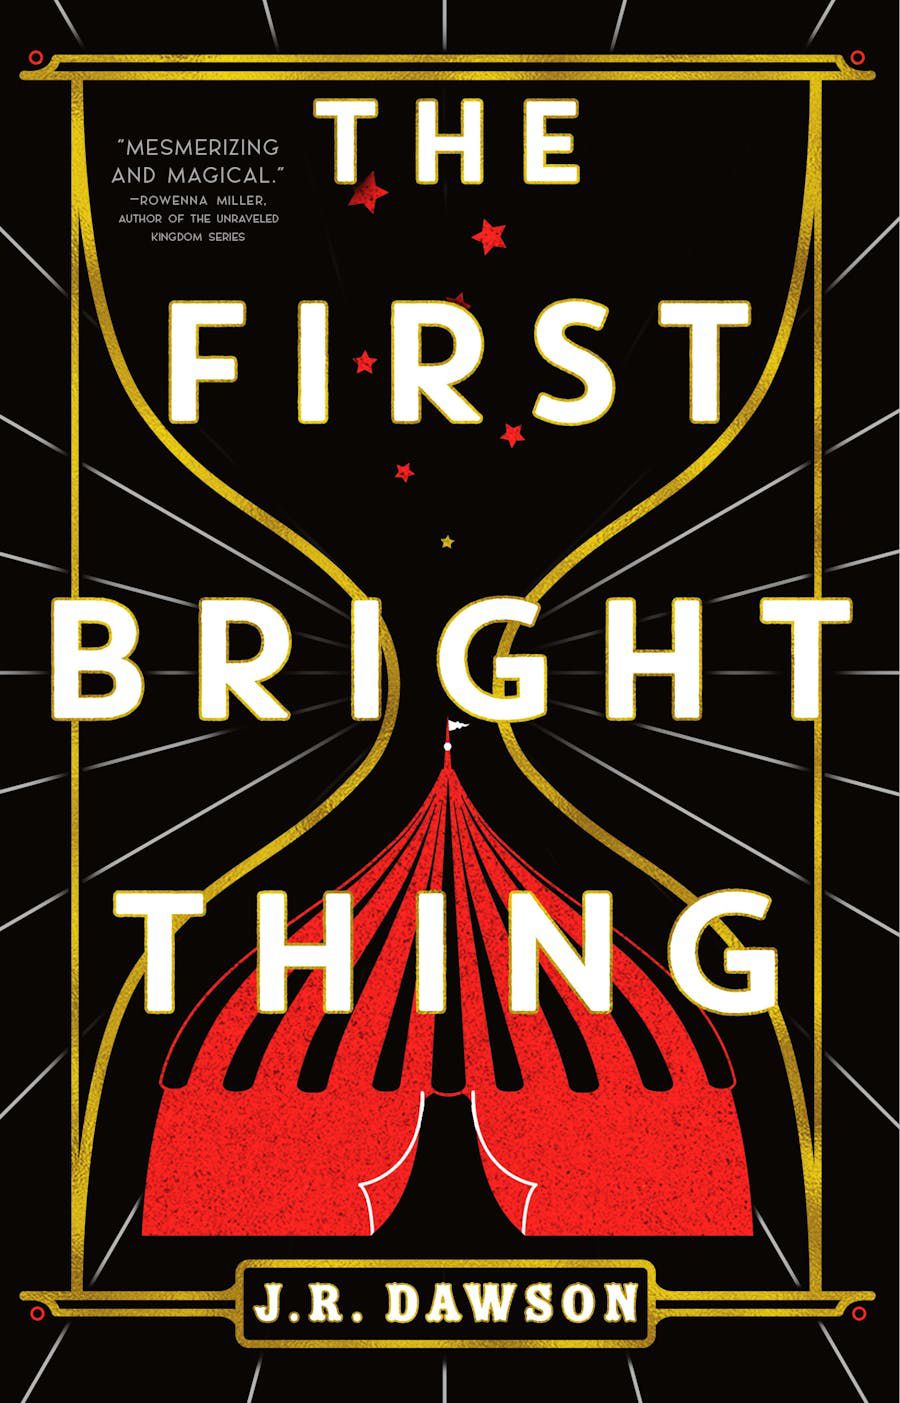 Cover image for J.R. Dawson’s The First Bright Thing, featuring an hourglass with a red circus tent at the bottom.